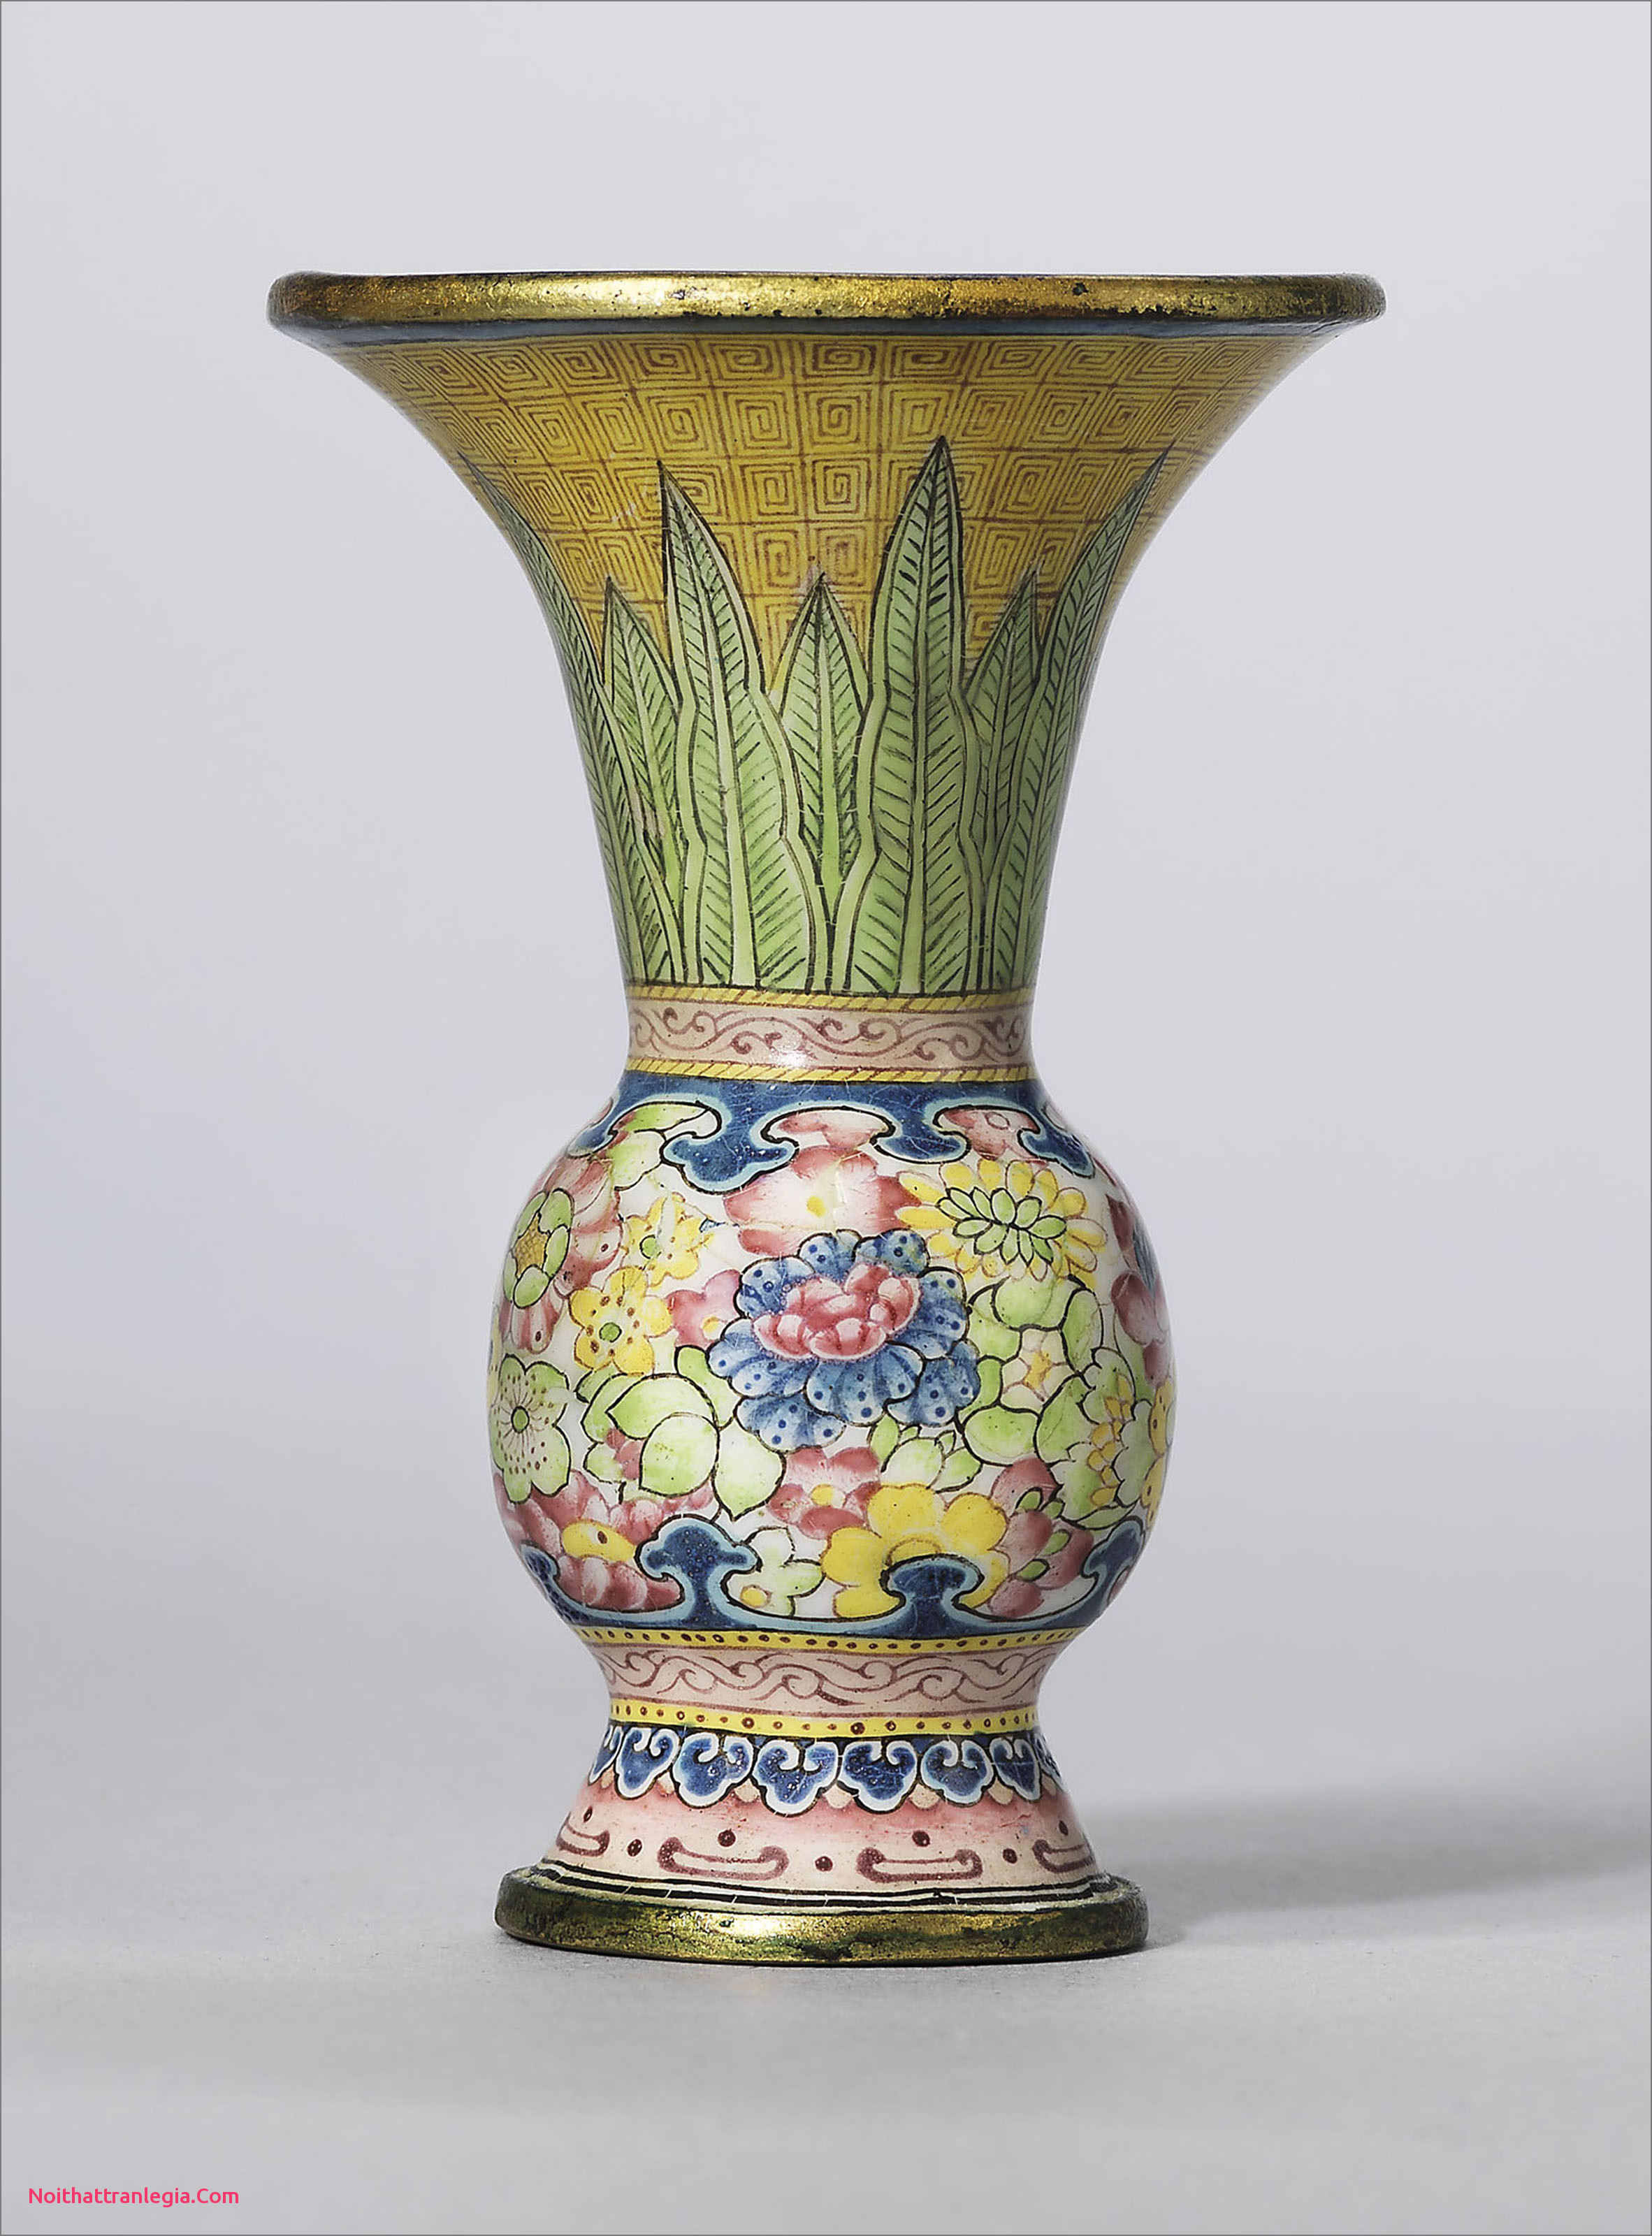 23 Spectacular Antique Green Vase 2024 free download antique green vase of 20 chinese antique vase noithattranlegia vases design pertaining to chinese antique vase unique a guide to the symbolism of flowers on chinese ceramics of chinese antiq